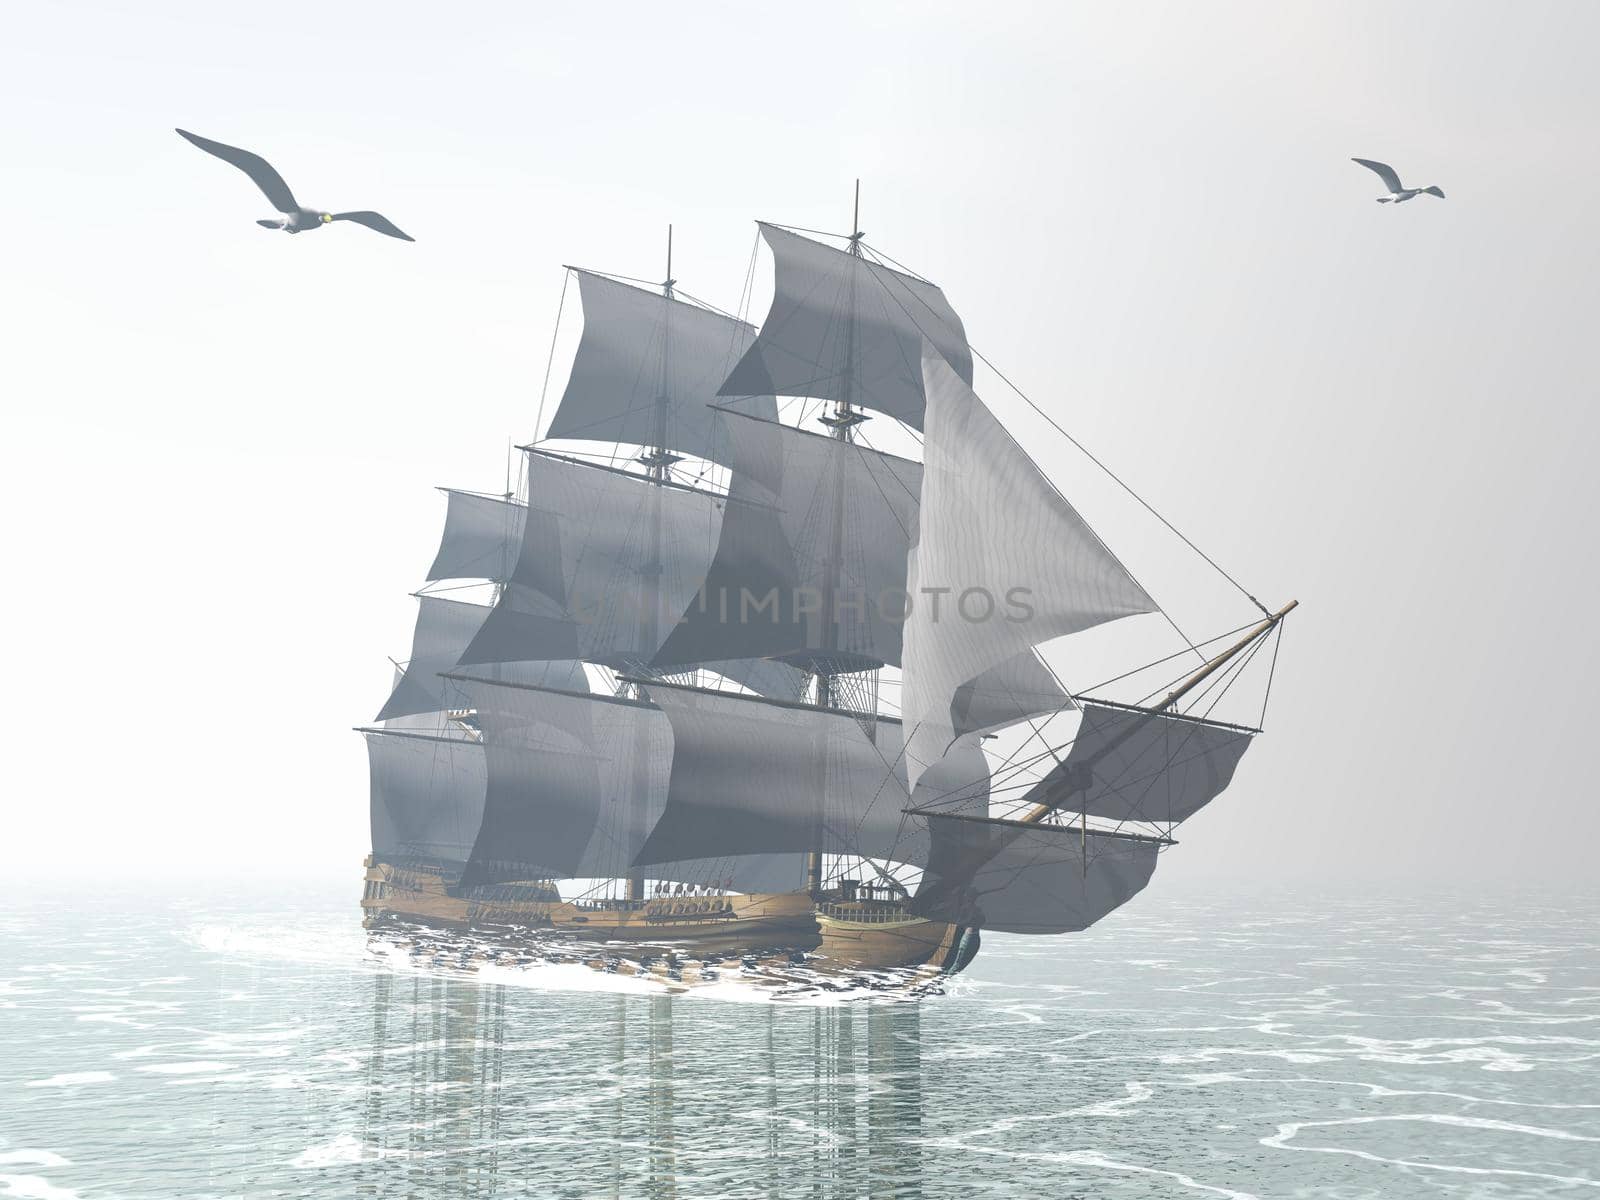 Beautiful detailed old merchant ship next to seagulls by foggy morning light